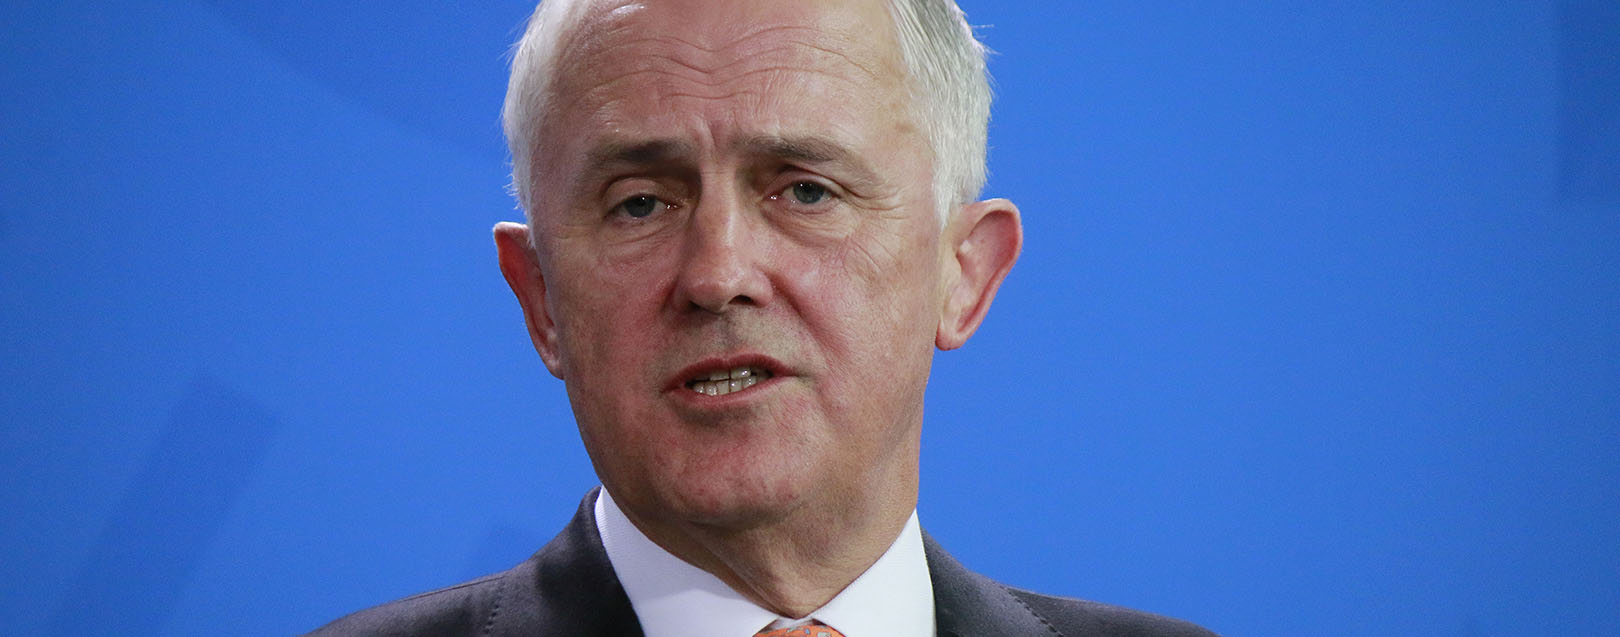 Aussie PM Turnbull expected to visit India next week